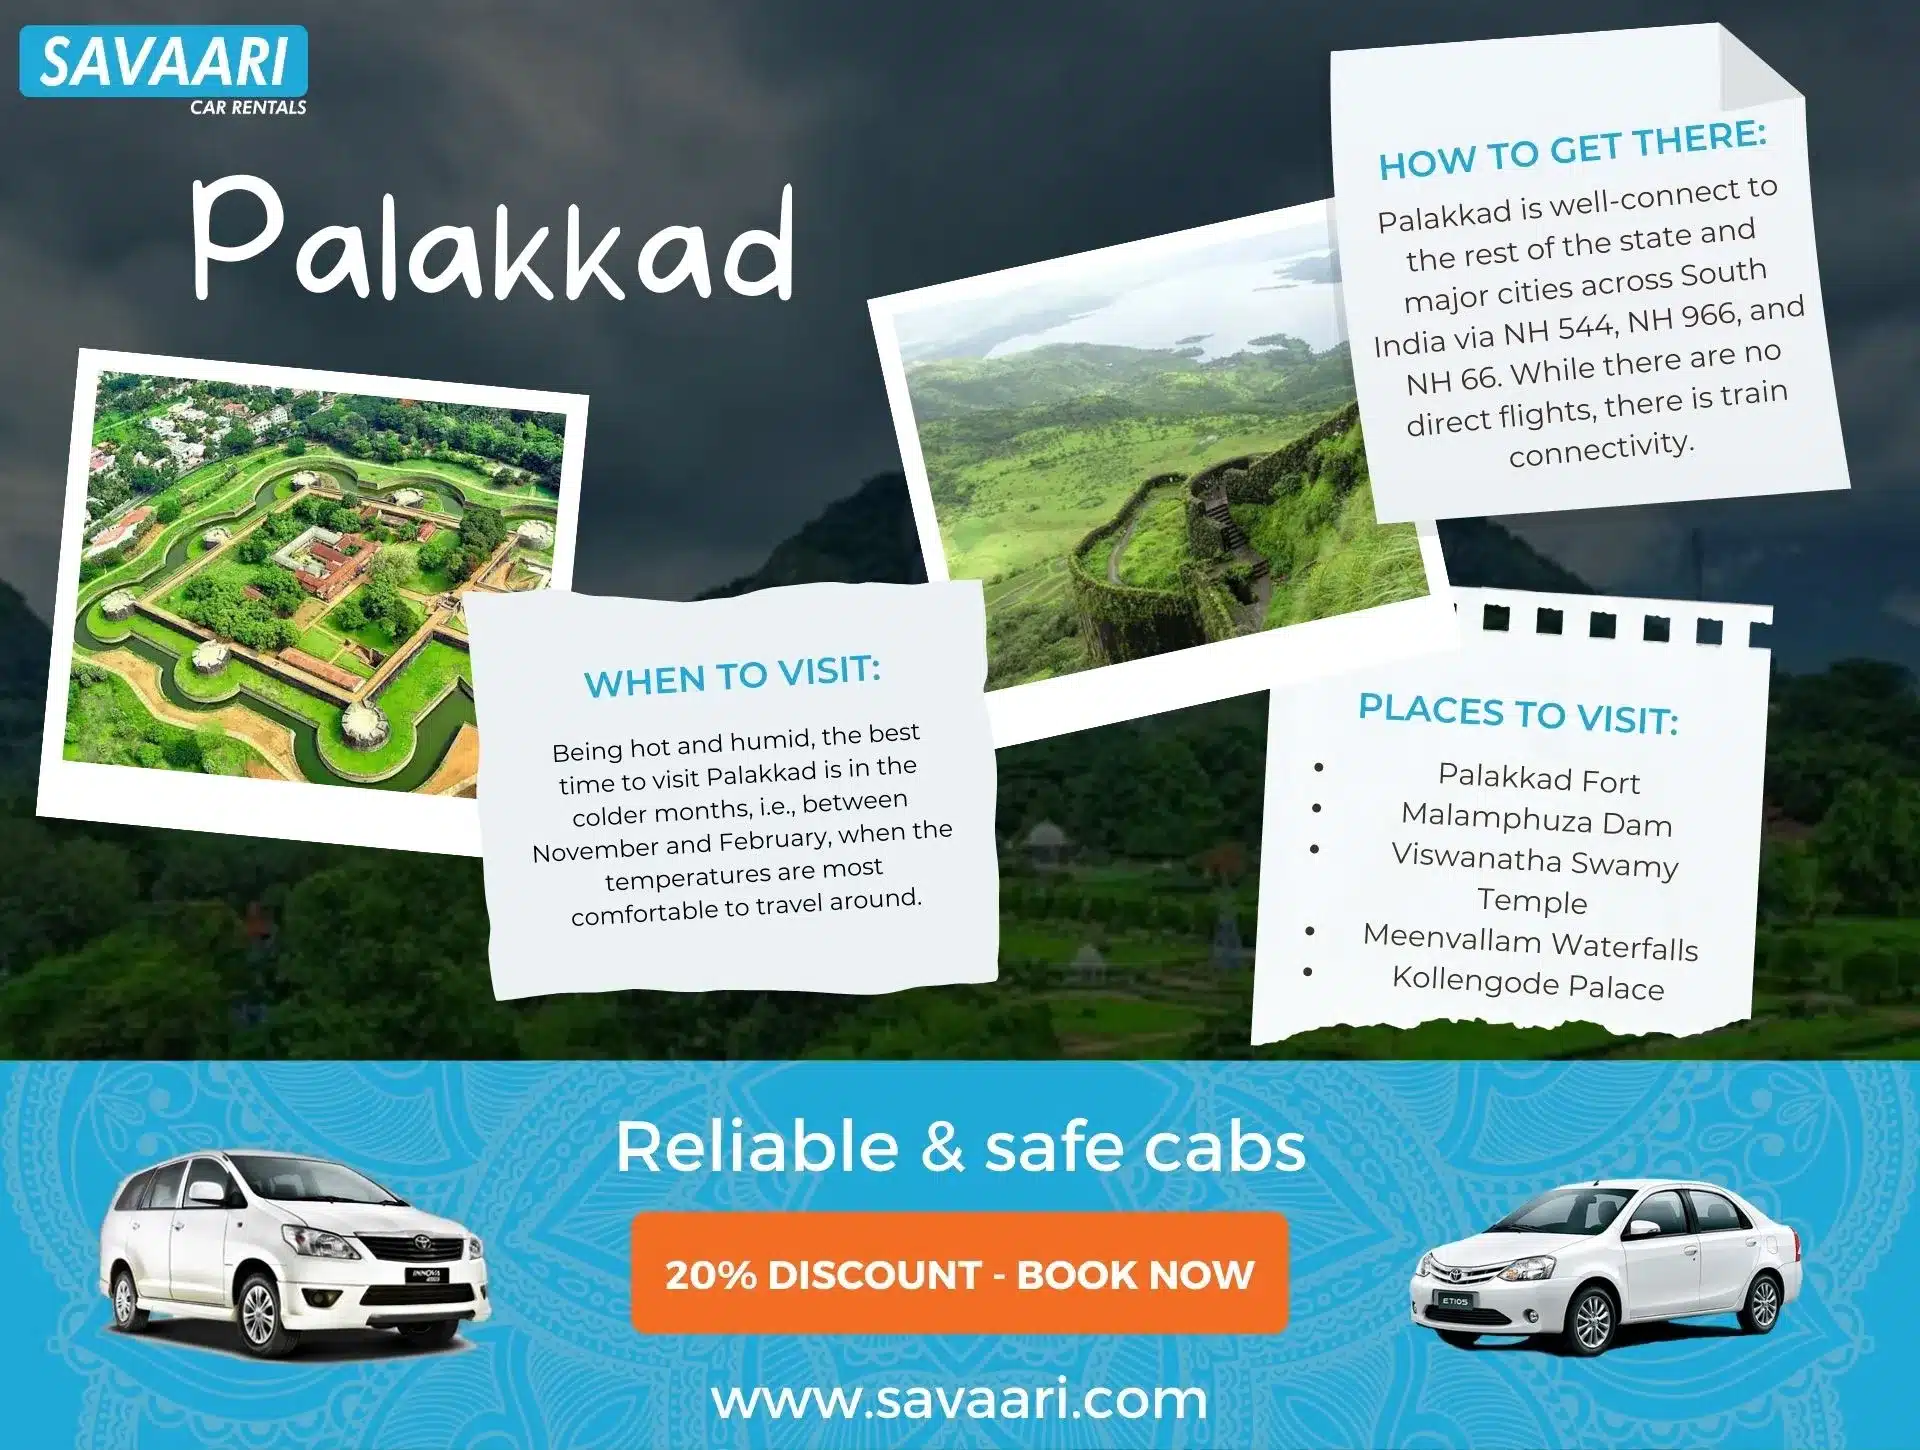 Things to do in Pallakad